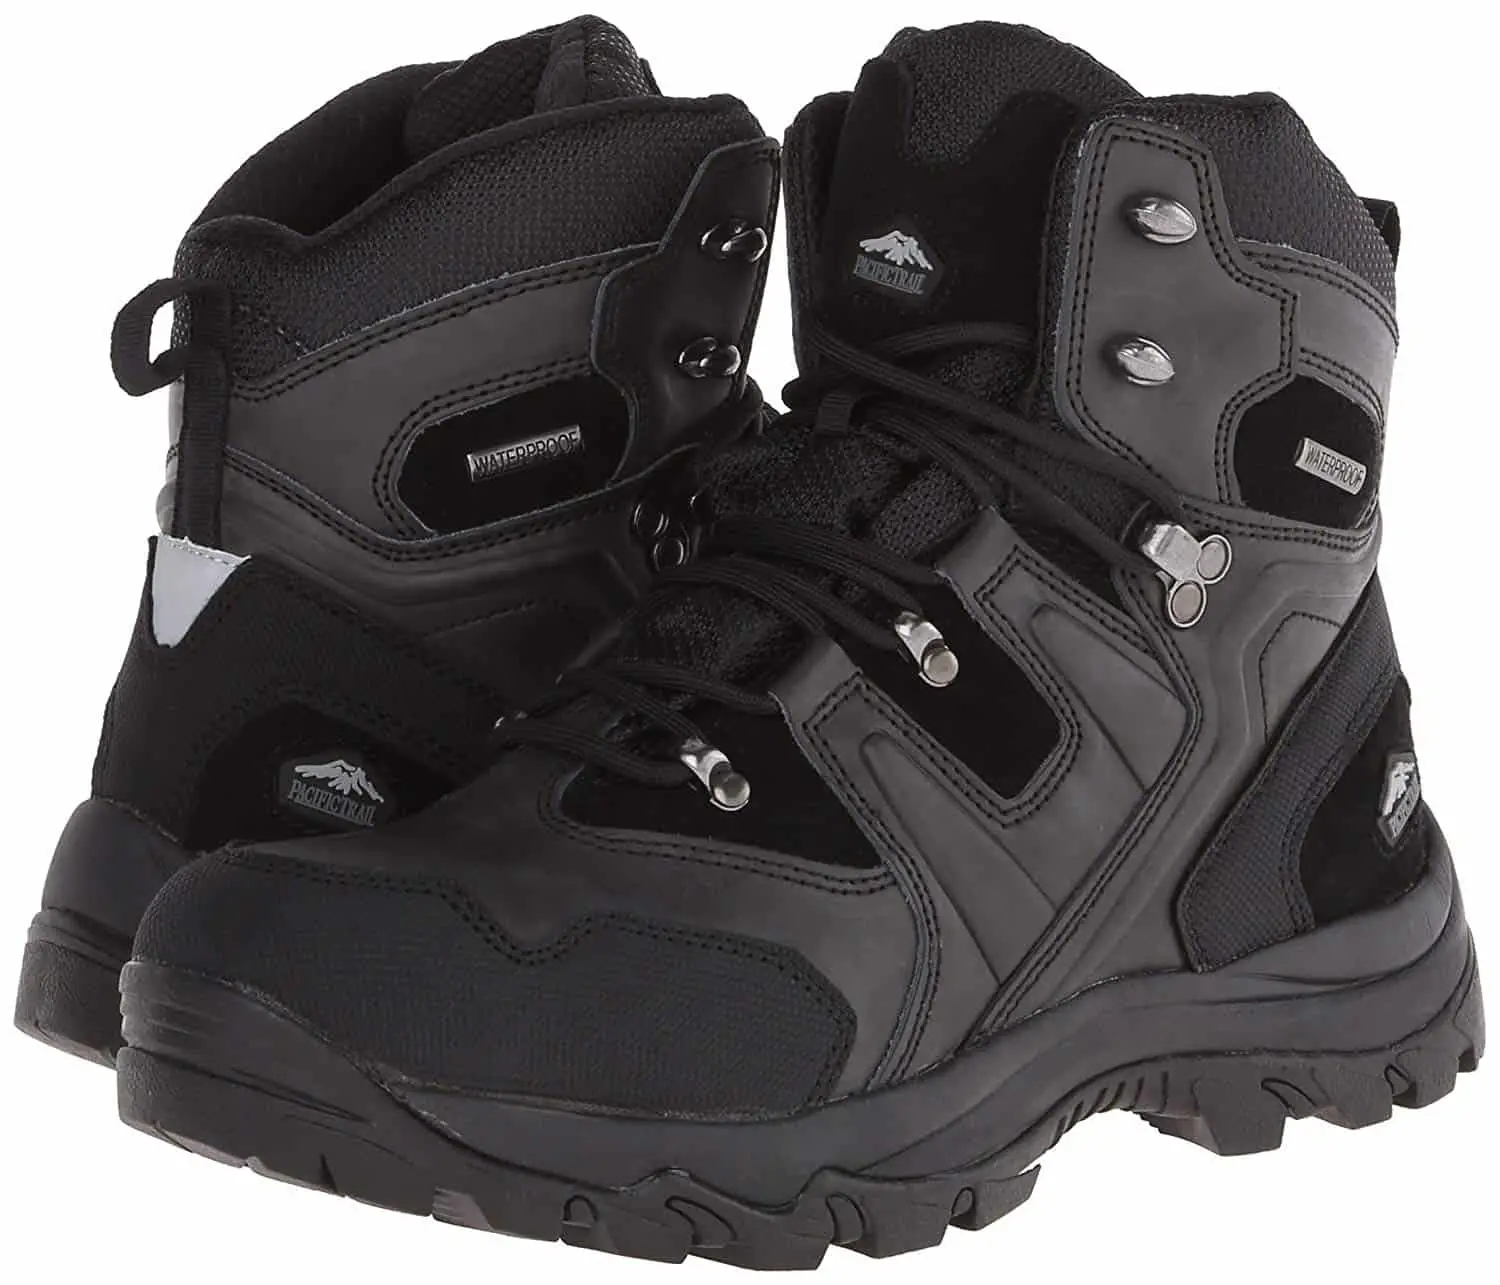 pacific trail hiking boots